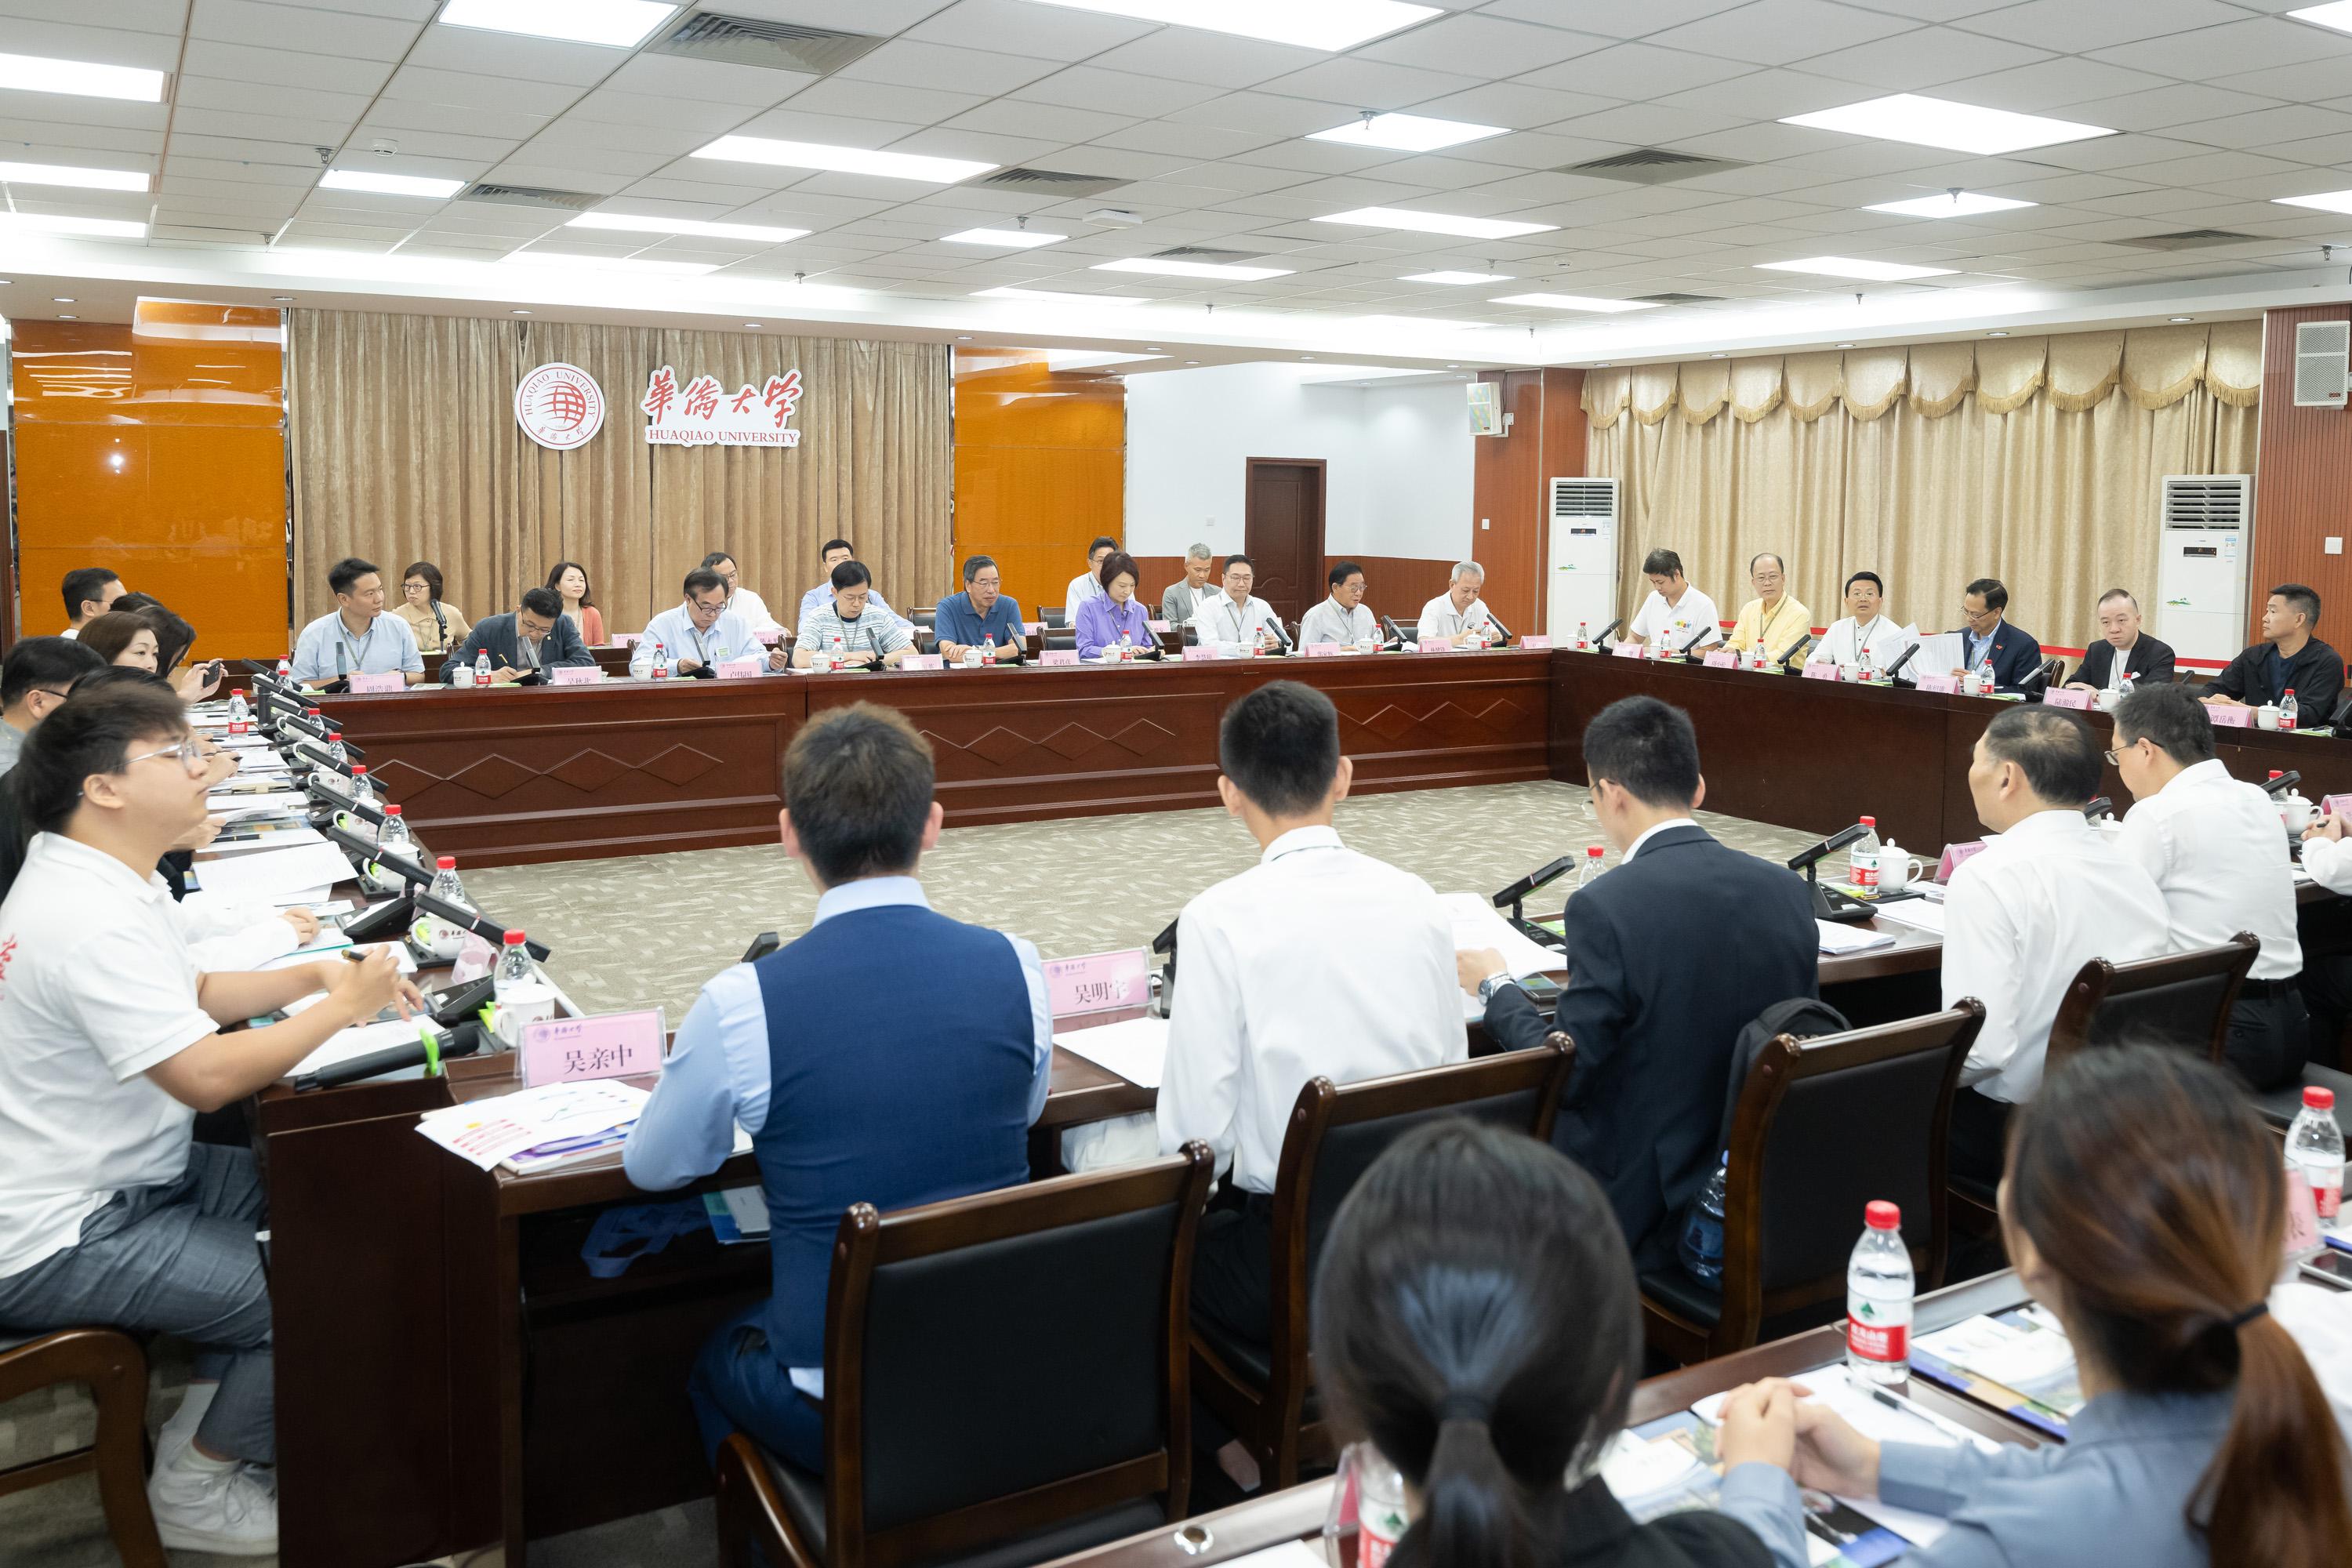 The delegation of the Legislative Council (LegCo), led by the LegCo President, Mr Andrew Leung, continued its study visit in Xiamen today (July 18). Photo shows the delegation meeting with Hong Kong students studying in Huaqiao University to learn about their study and employment situation.